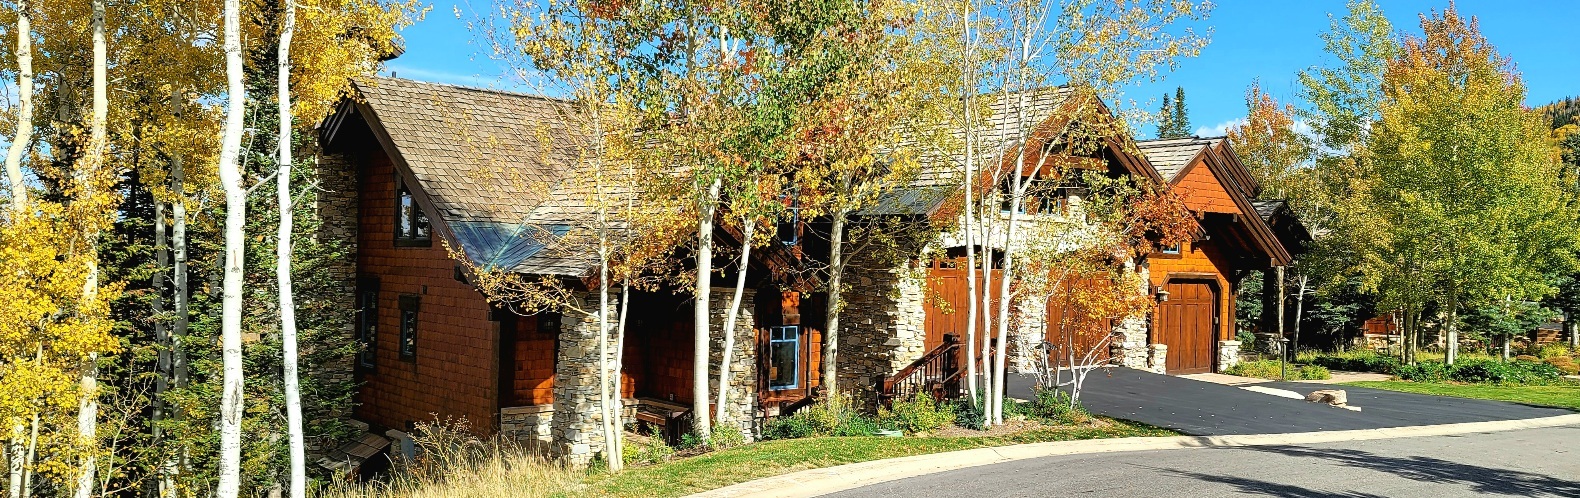 Larkspur condos for sale in the Empire Pass area of Deer Valley